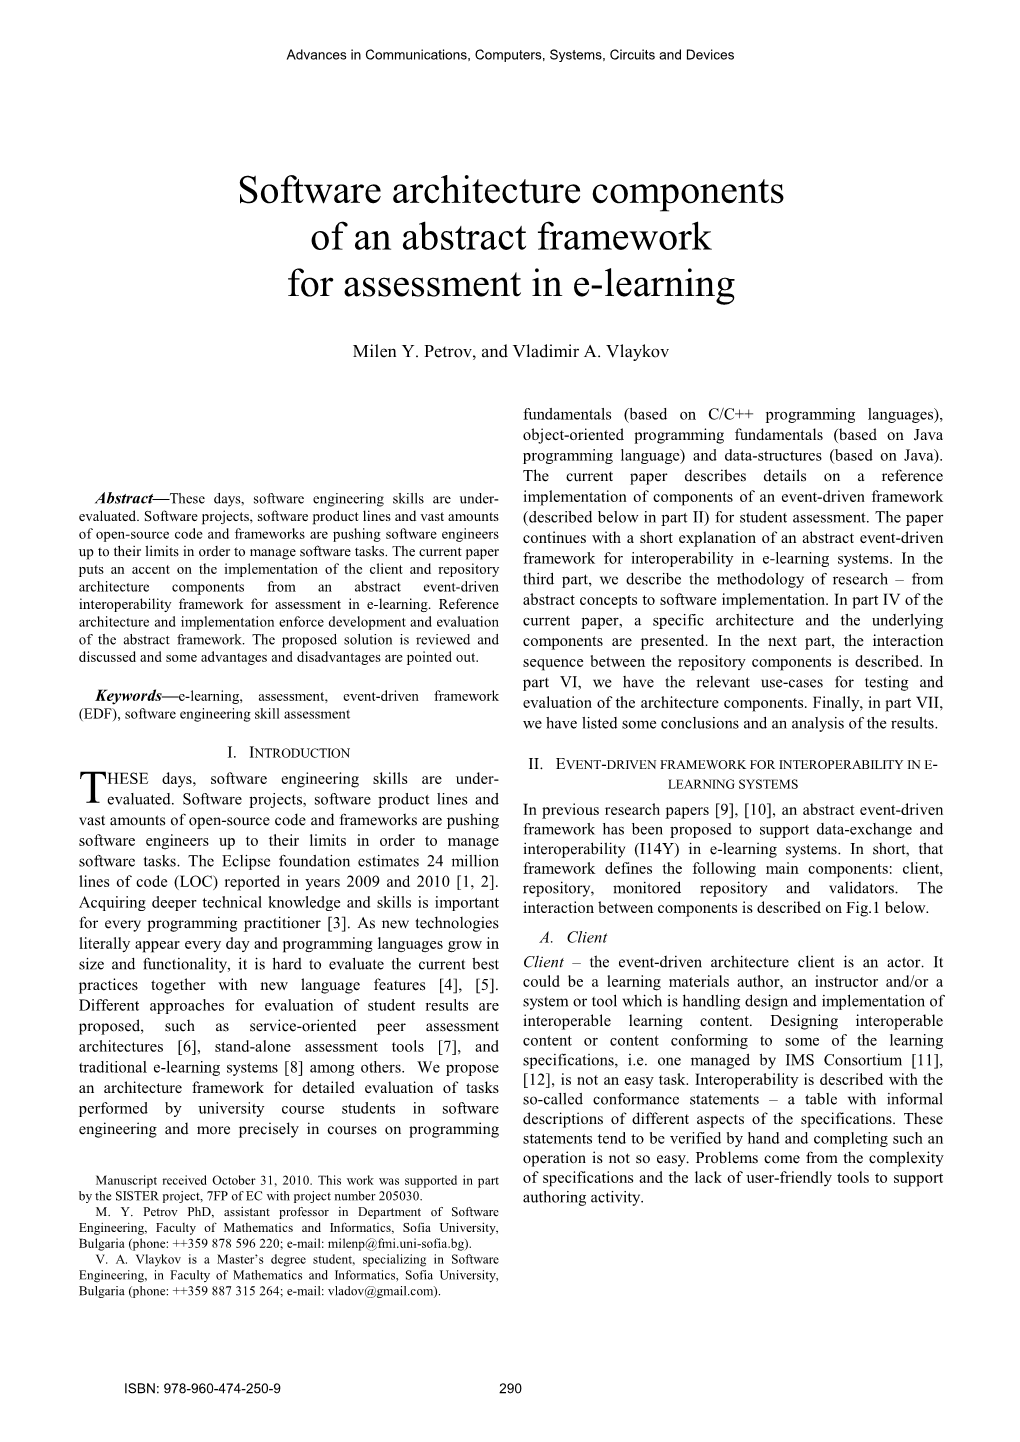 Software Architecture Components of an Abstract Framework for Assessment in E-Learning